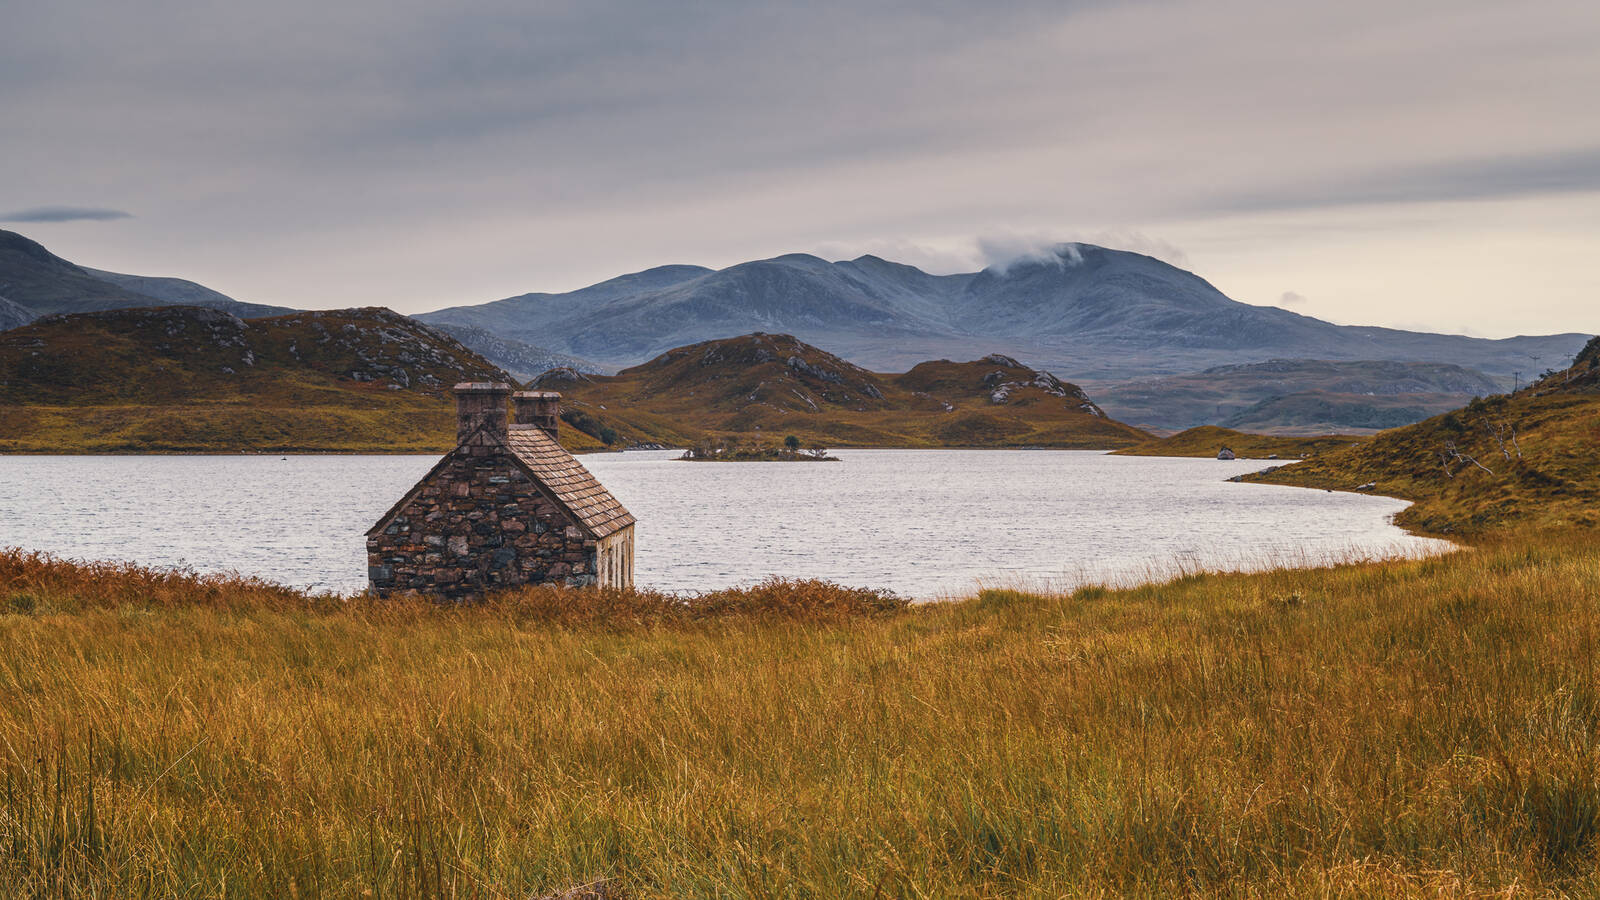 Image of The abandoned cottage at Loch Stack by James Billings.